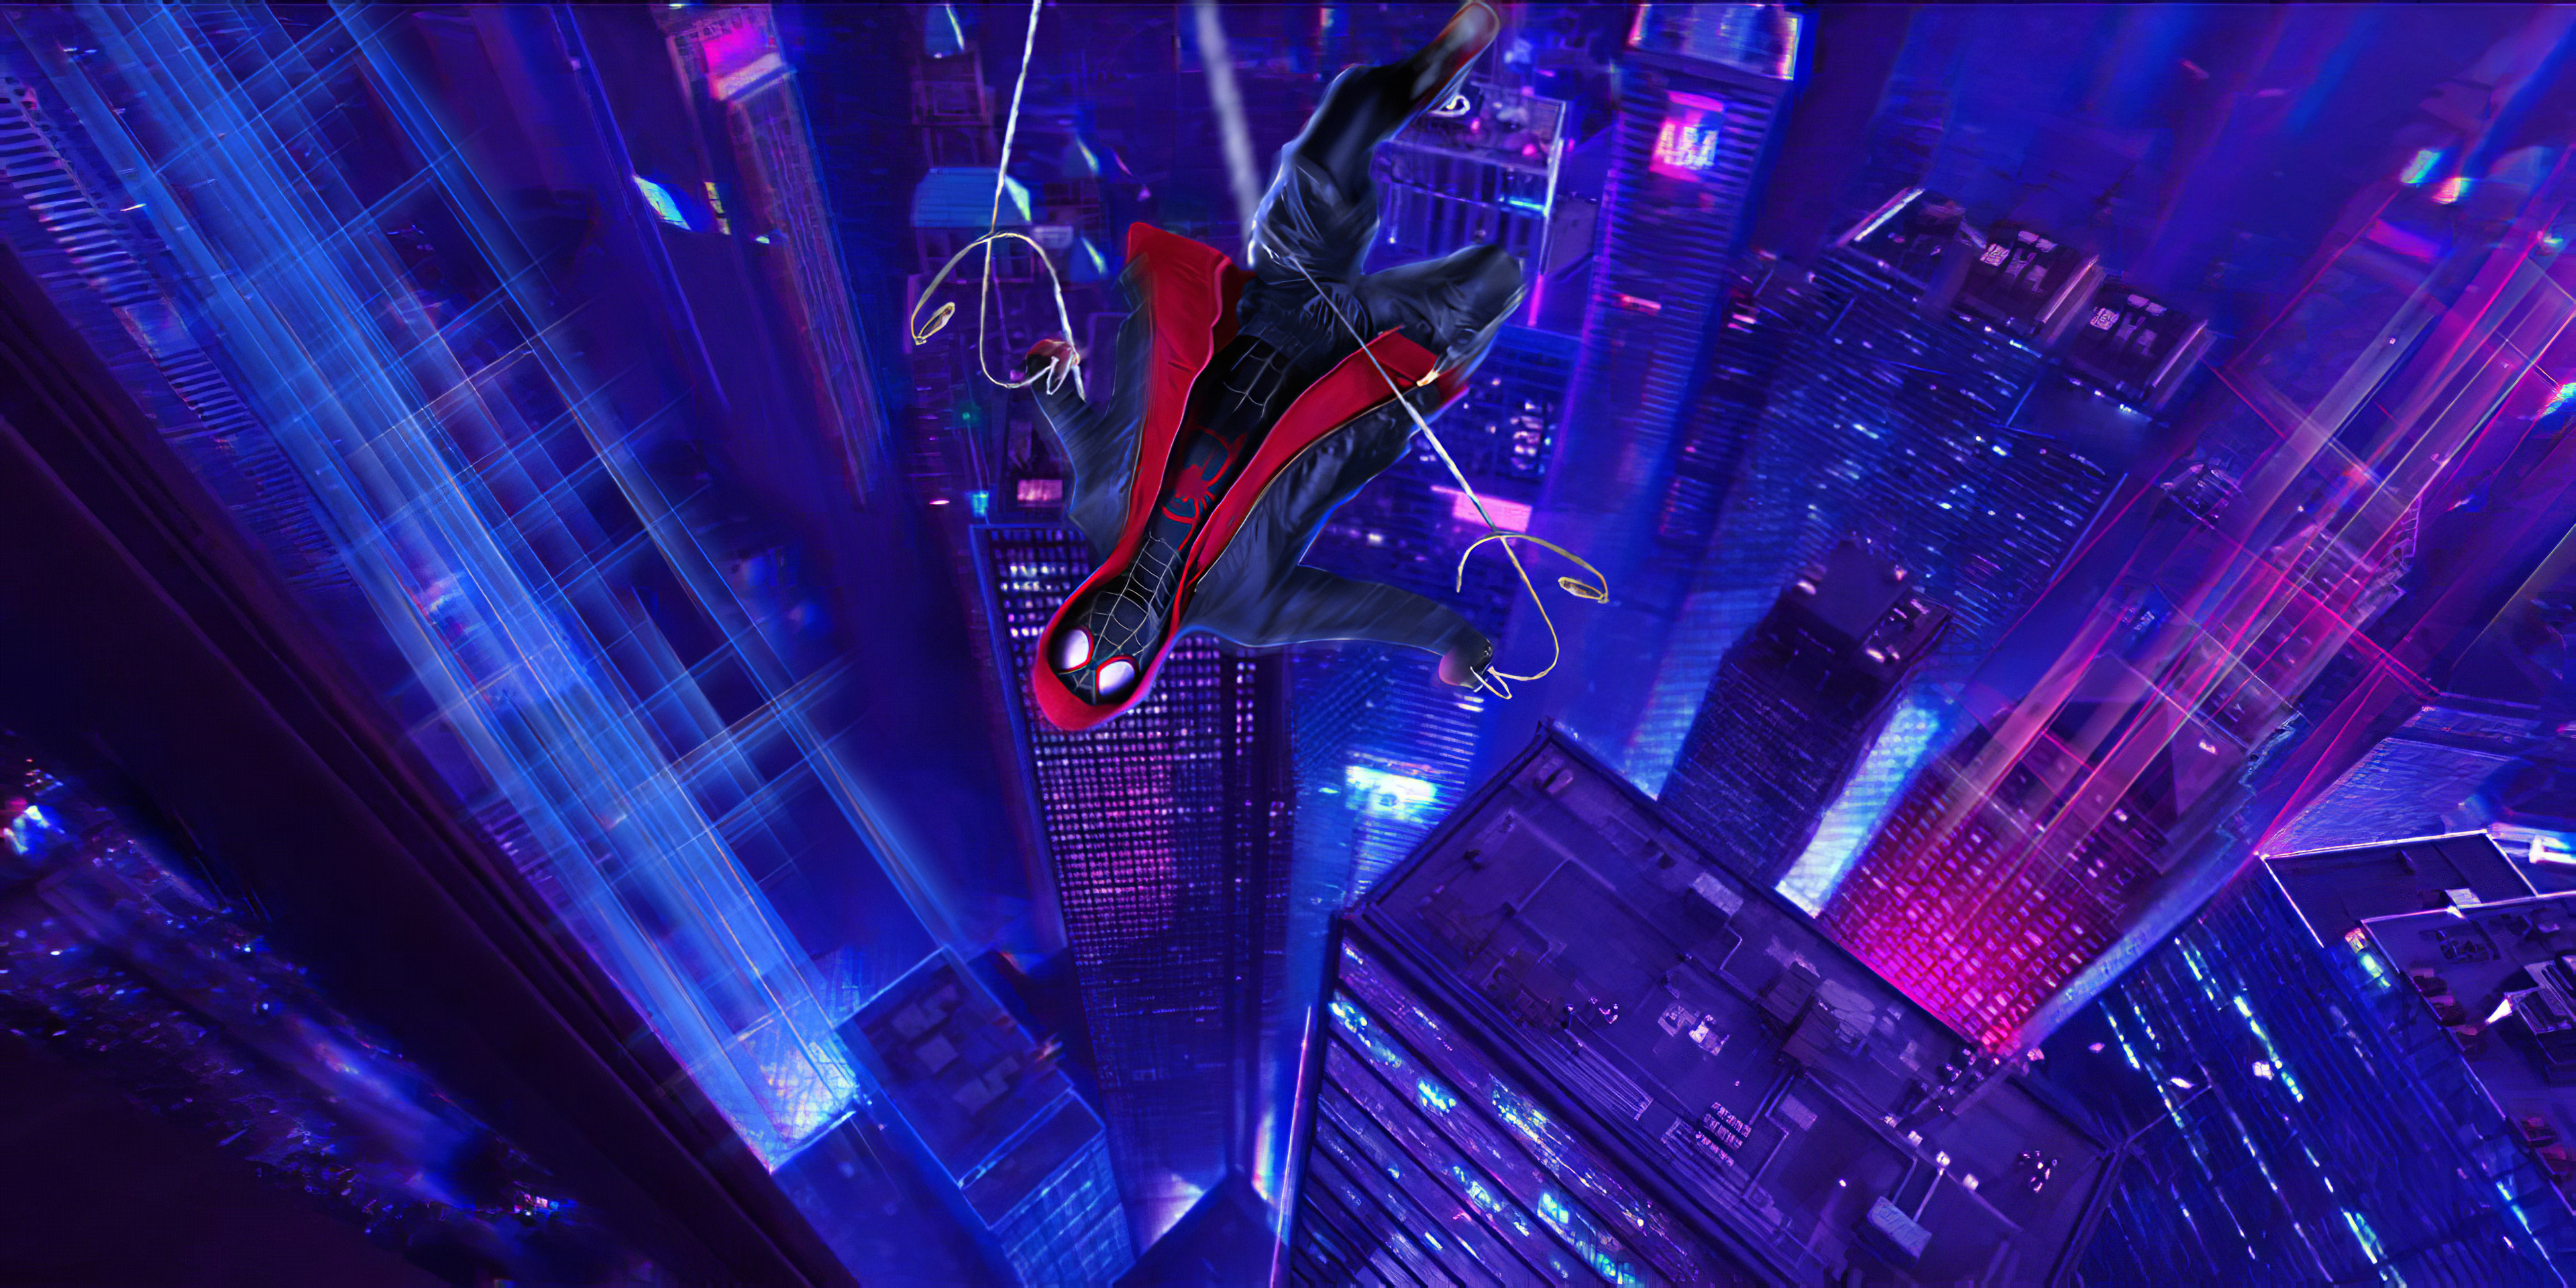 spider man into the spider verse upside down wallpaper high quality